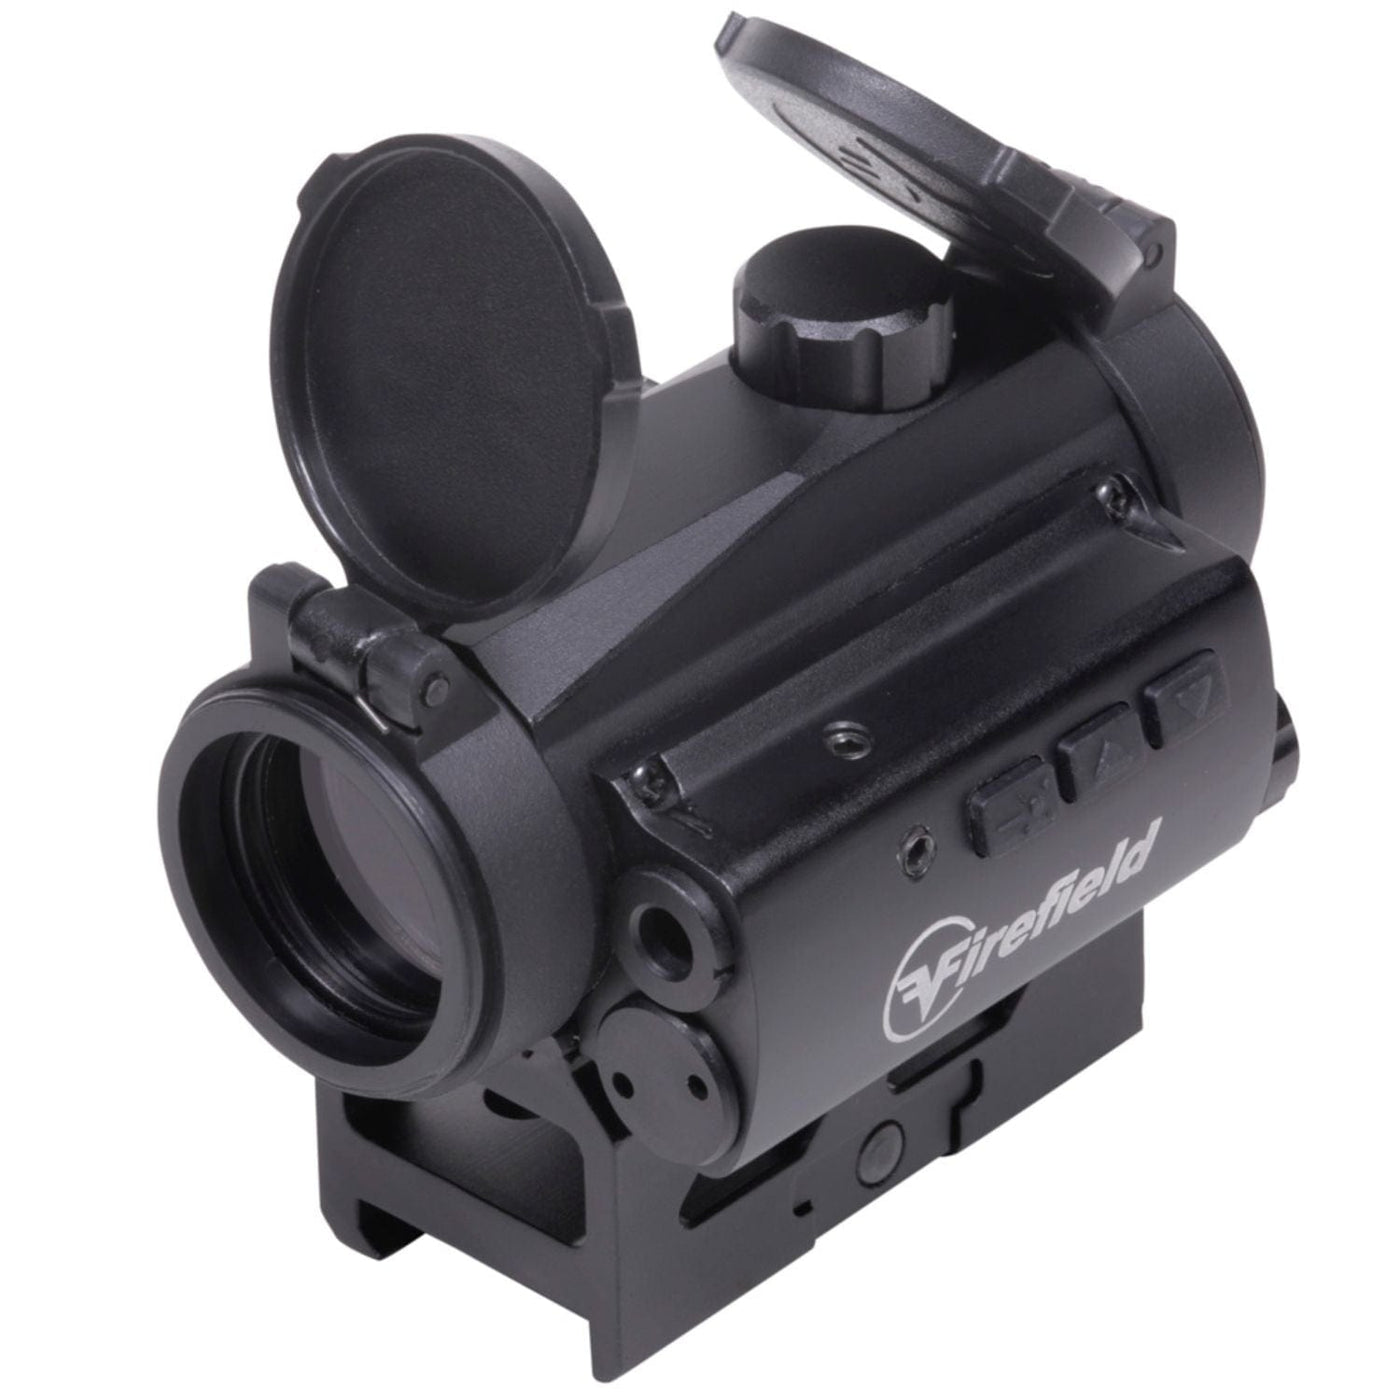 Firefield Firefield Impulse 1x22 Compact Red Dot Sight with Red Laser Optics And Sights